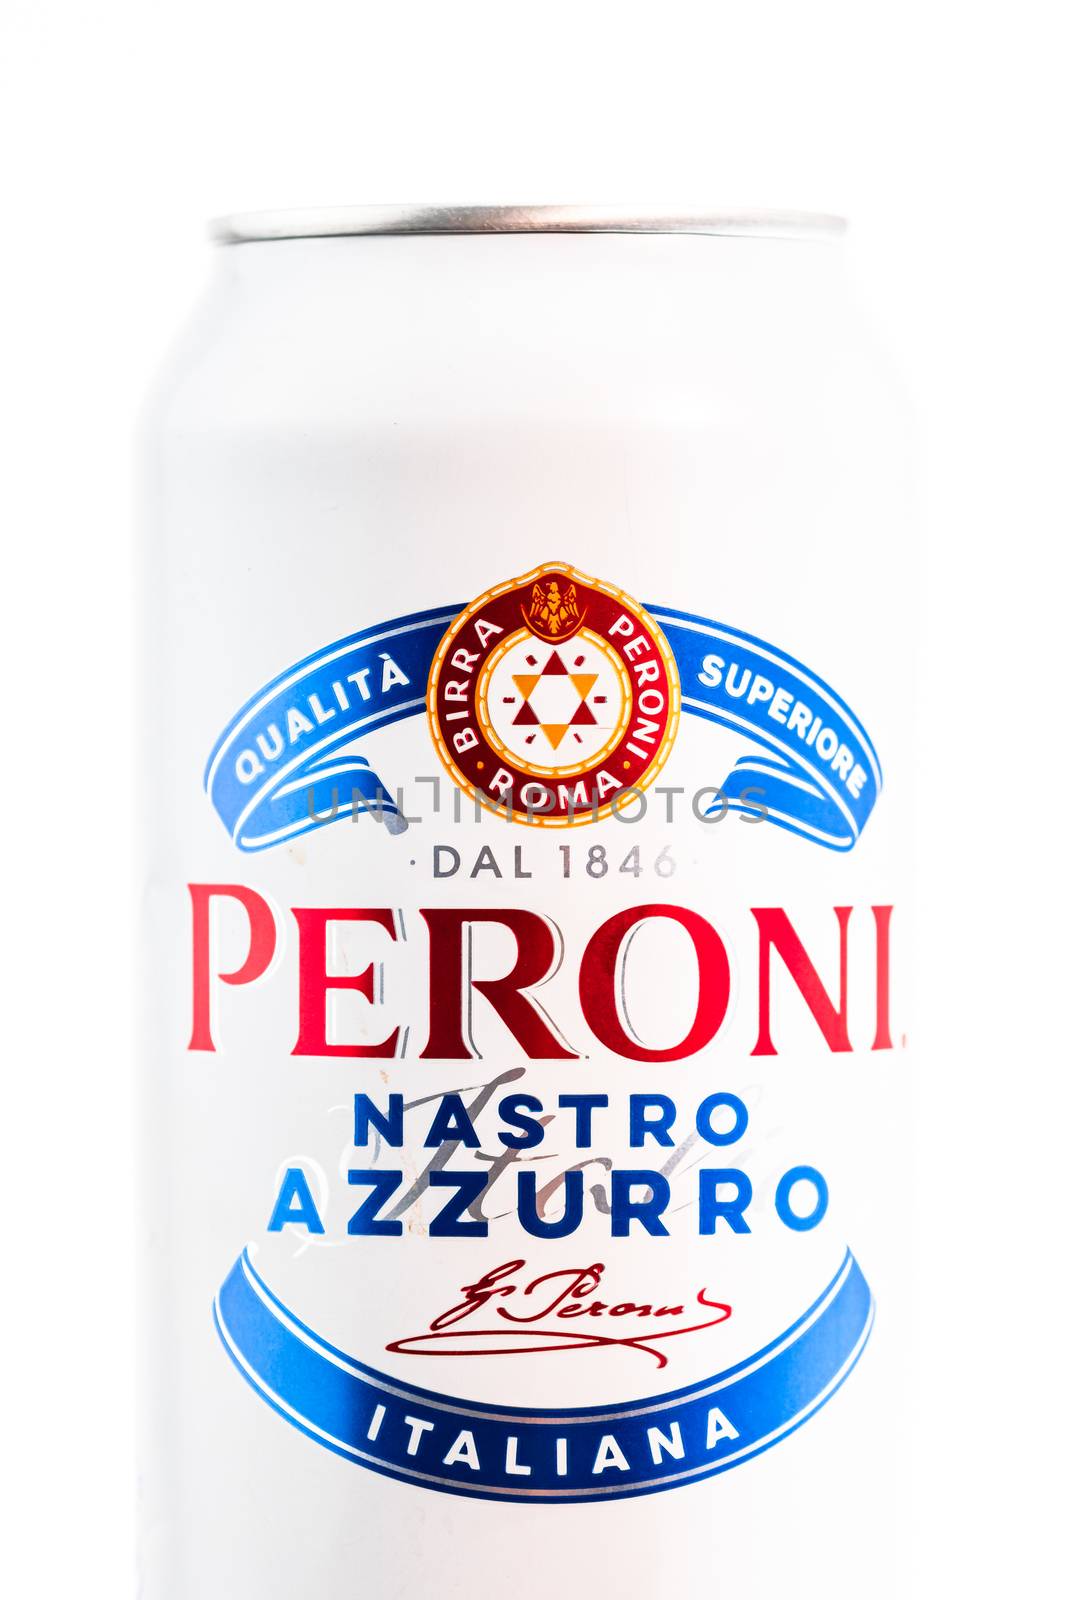 Peroni Nastro Azzurro, a premium lager beer produced since 1963 by Peroni Brewery located in Rome, Italy. Studio photo shoot in Bucharest, Romania, 2020